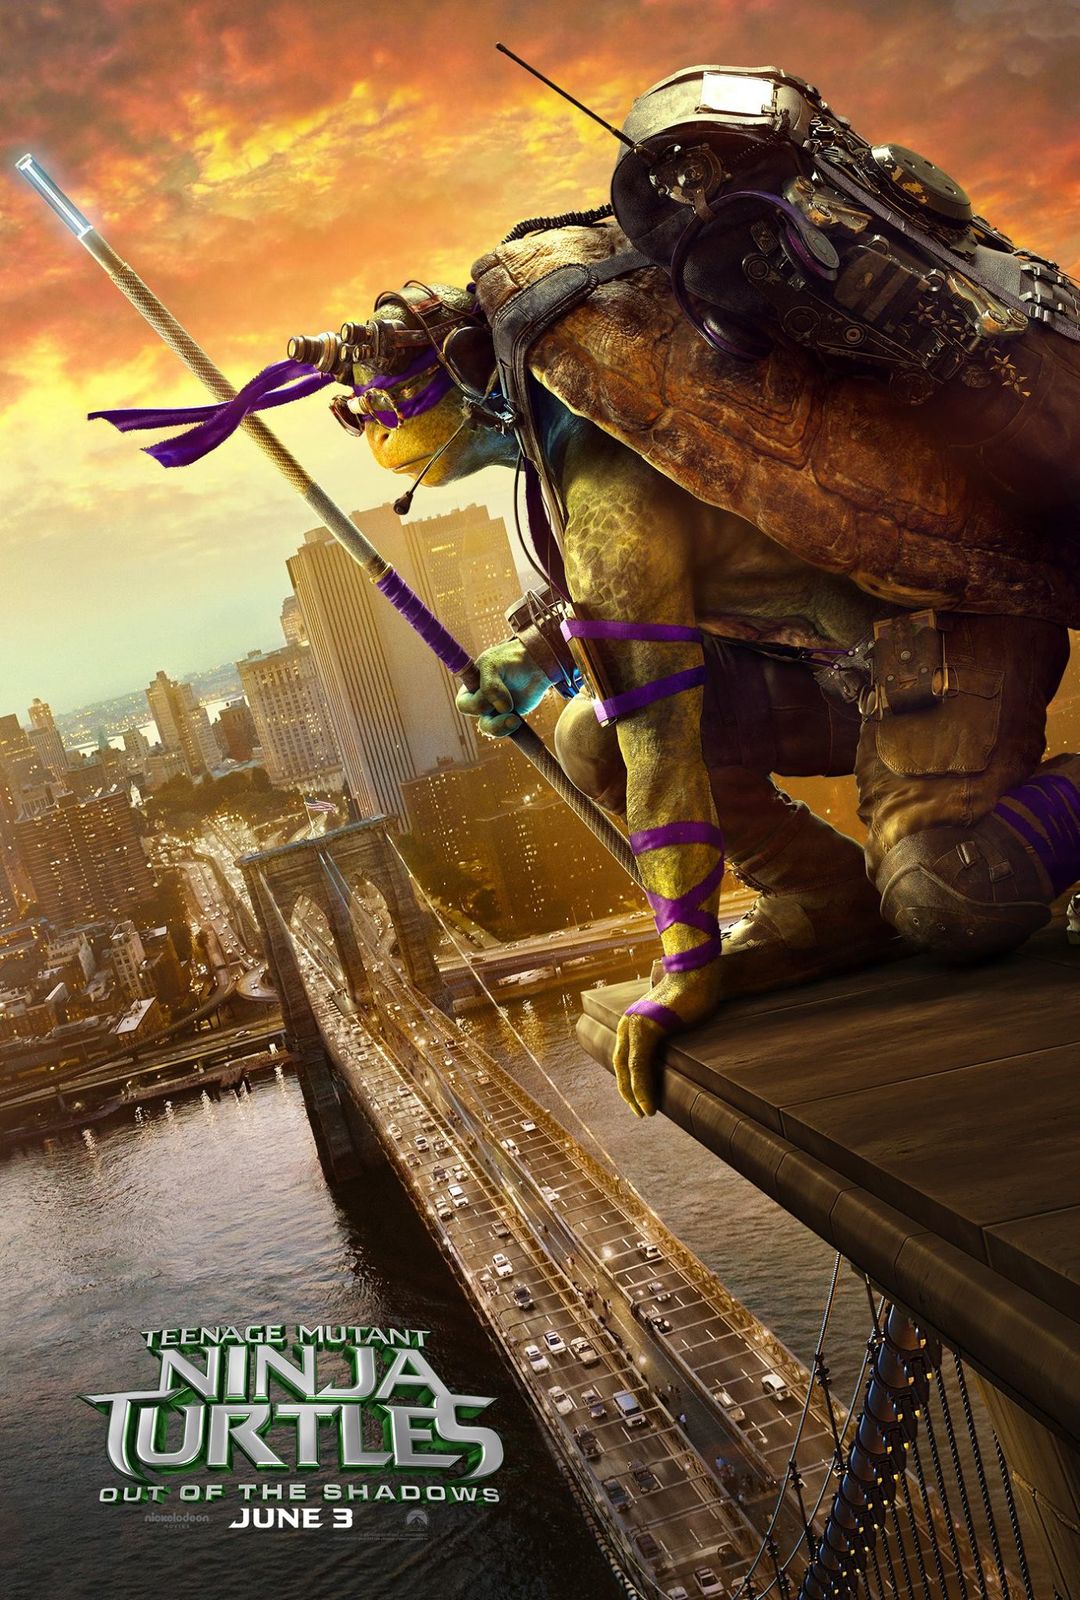 Teenage Mutant Ninja Turtles: Out of the Shadows Posters Released